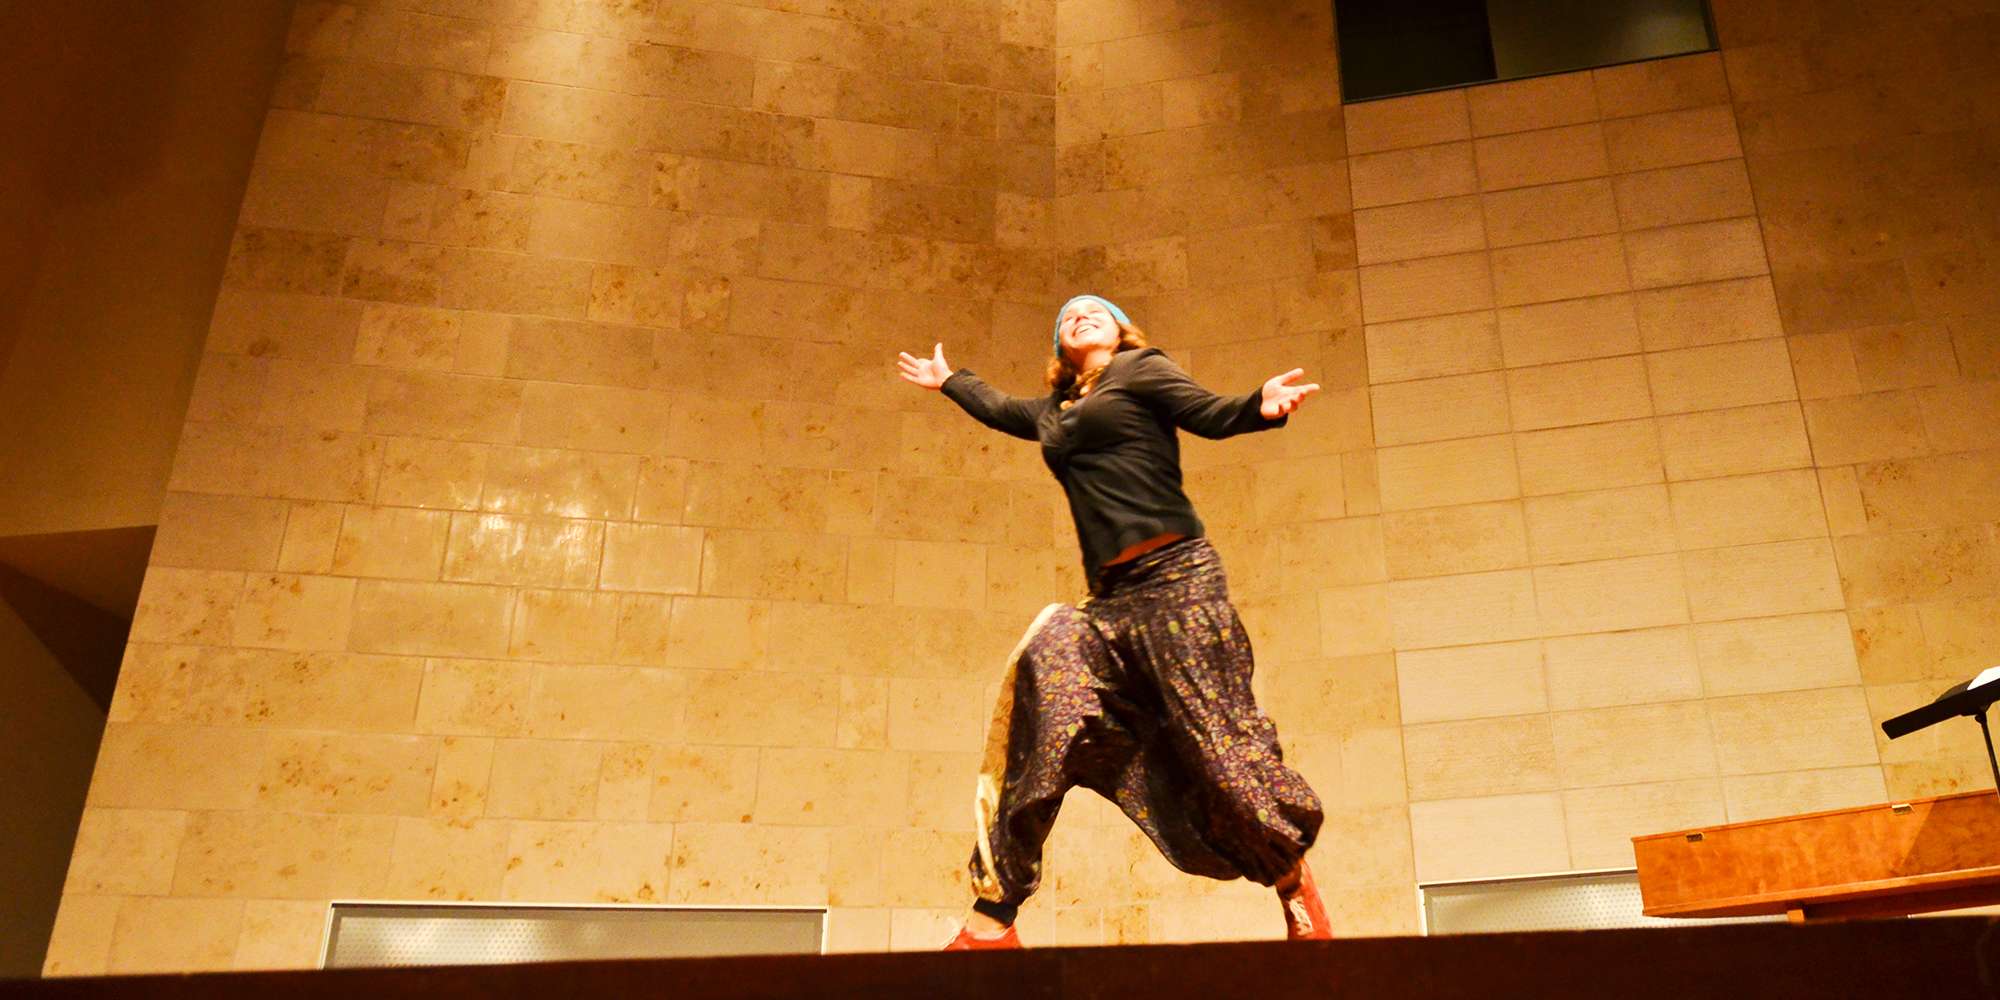 person with a dramatic, dynamic pose on the recital hall stage